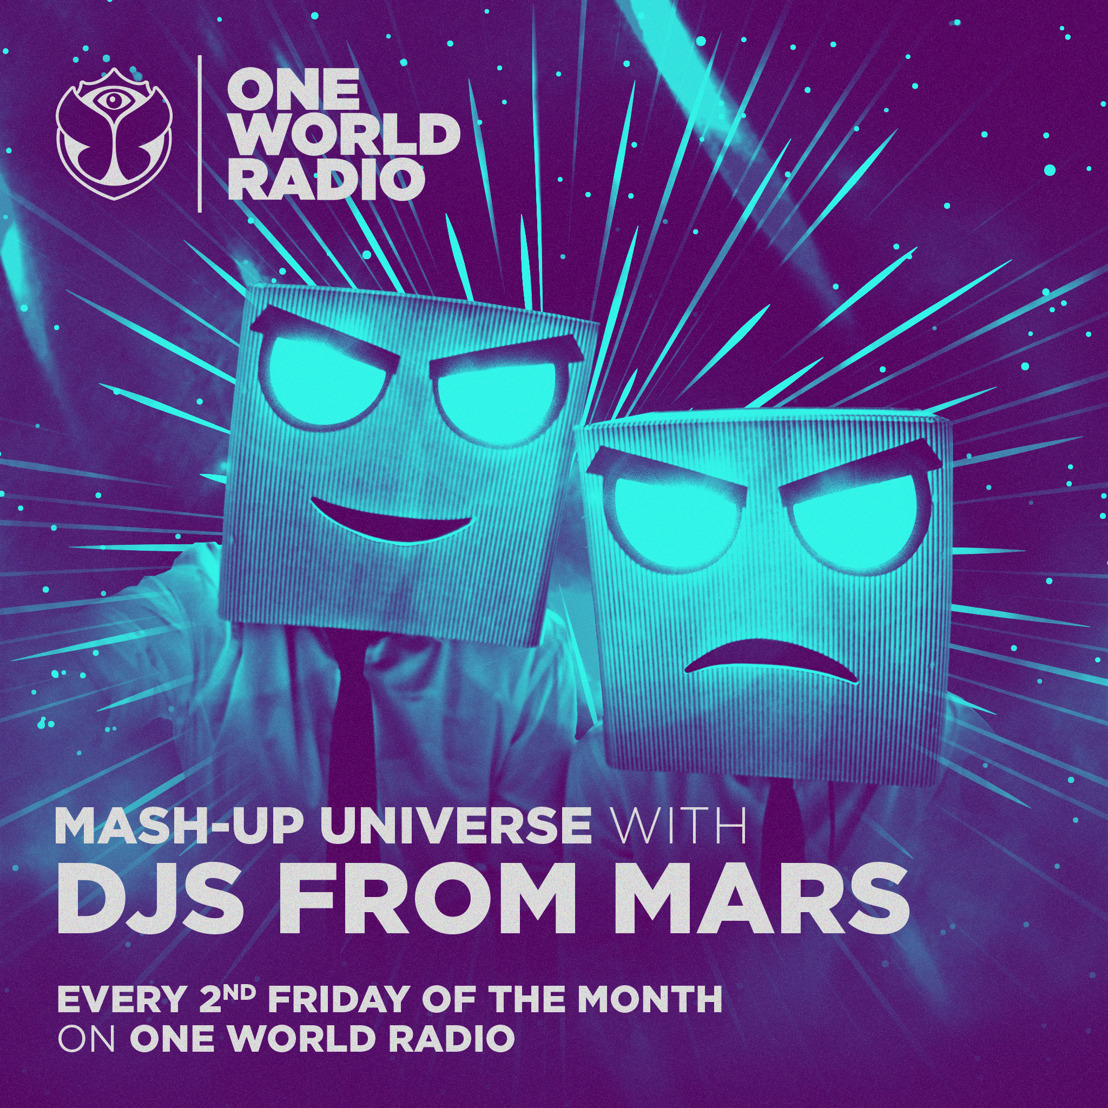 DJs from Mars kick off their own brand-new show Mash-Up Universe on One World Radio